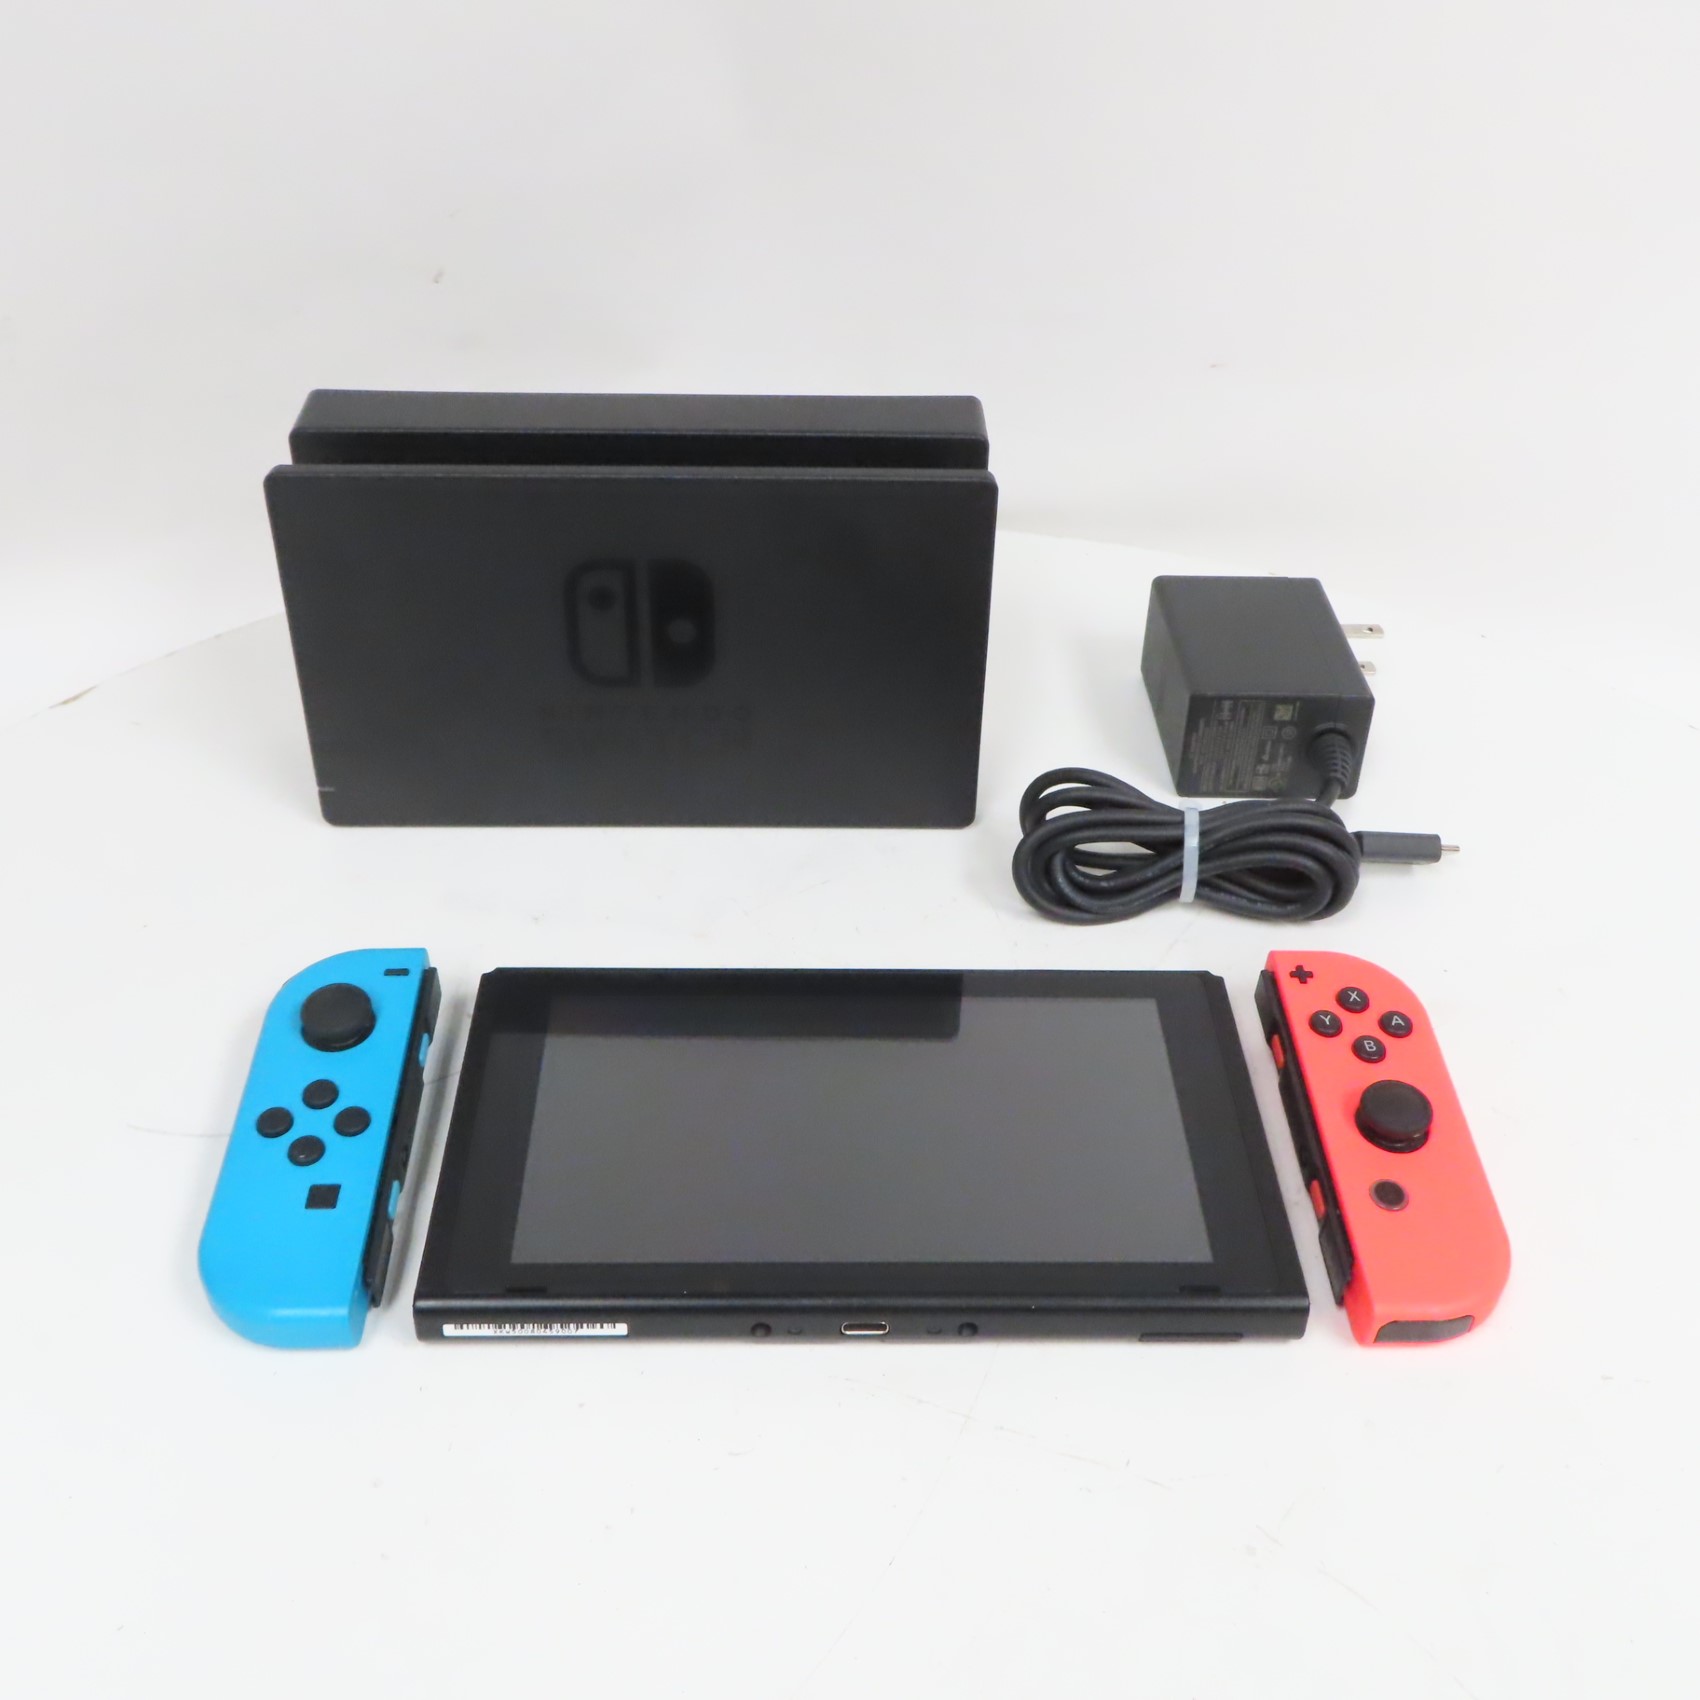 Nintendo HAC-001(-01) Switch 32GB Video Game Console - Red/Blue Joycons  (6719)